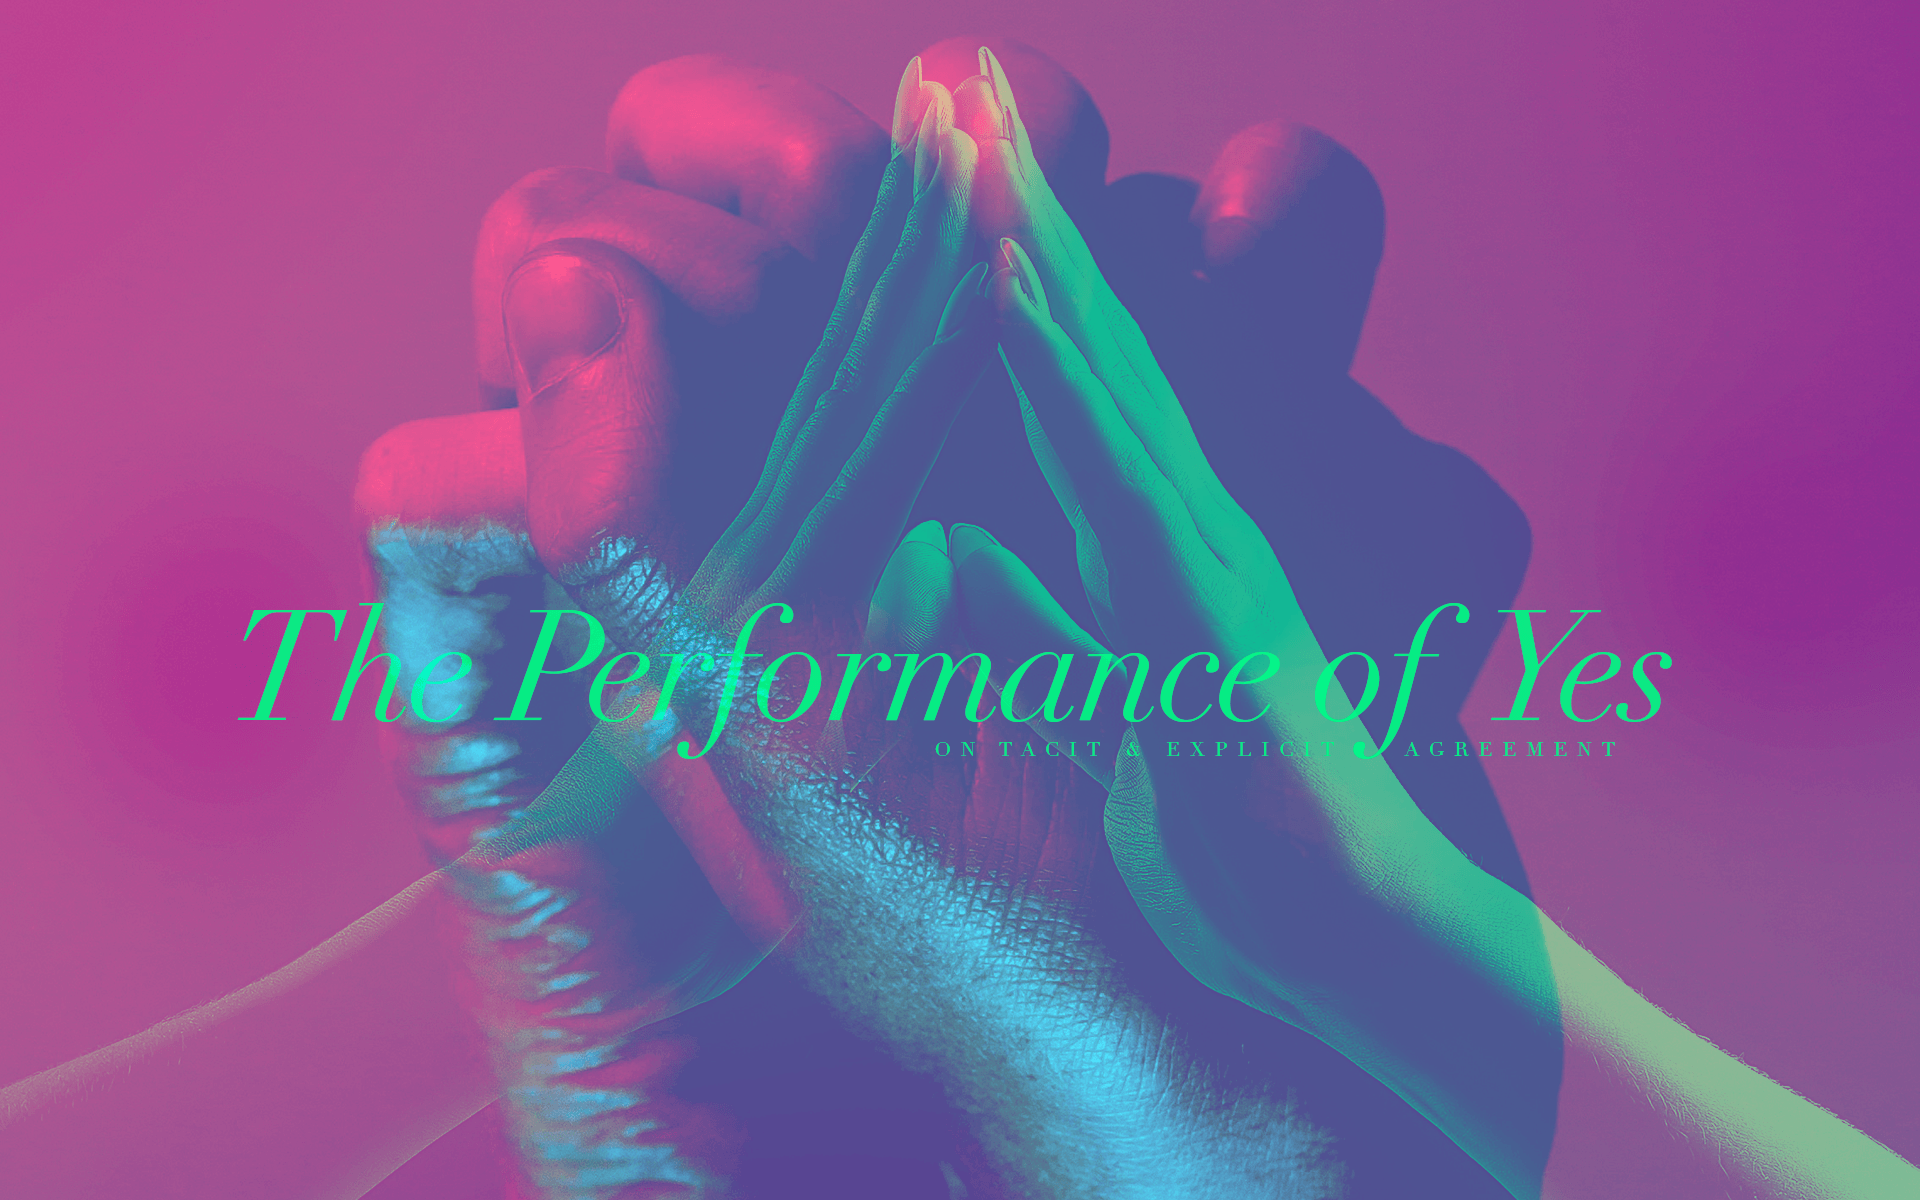 Issue.19: The Performance of Yes: On Tacit & Explicit Agreement